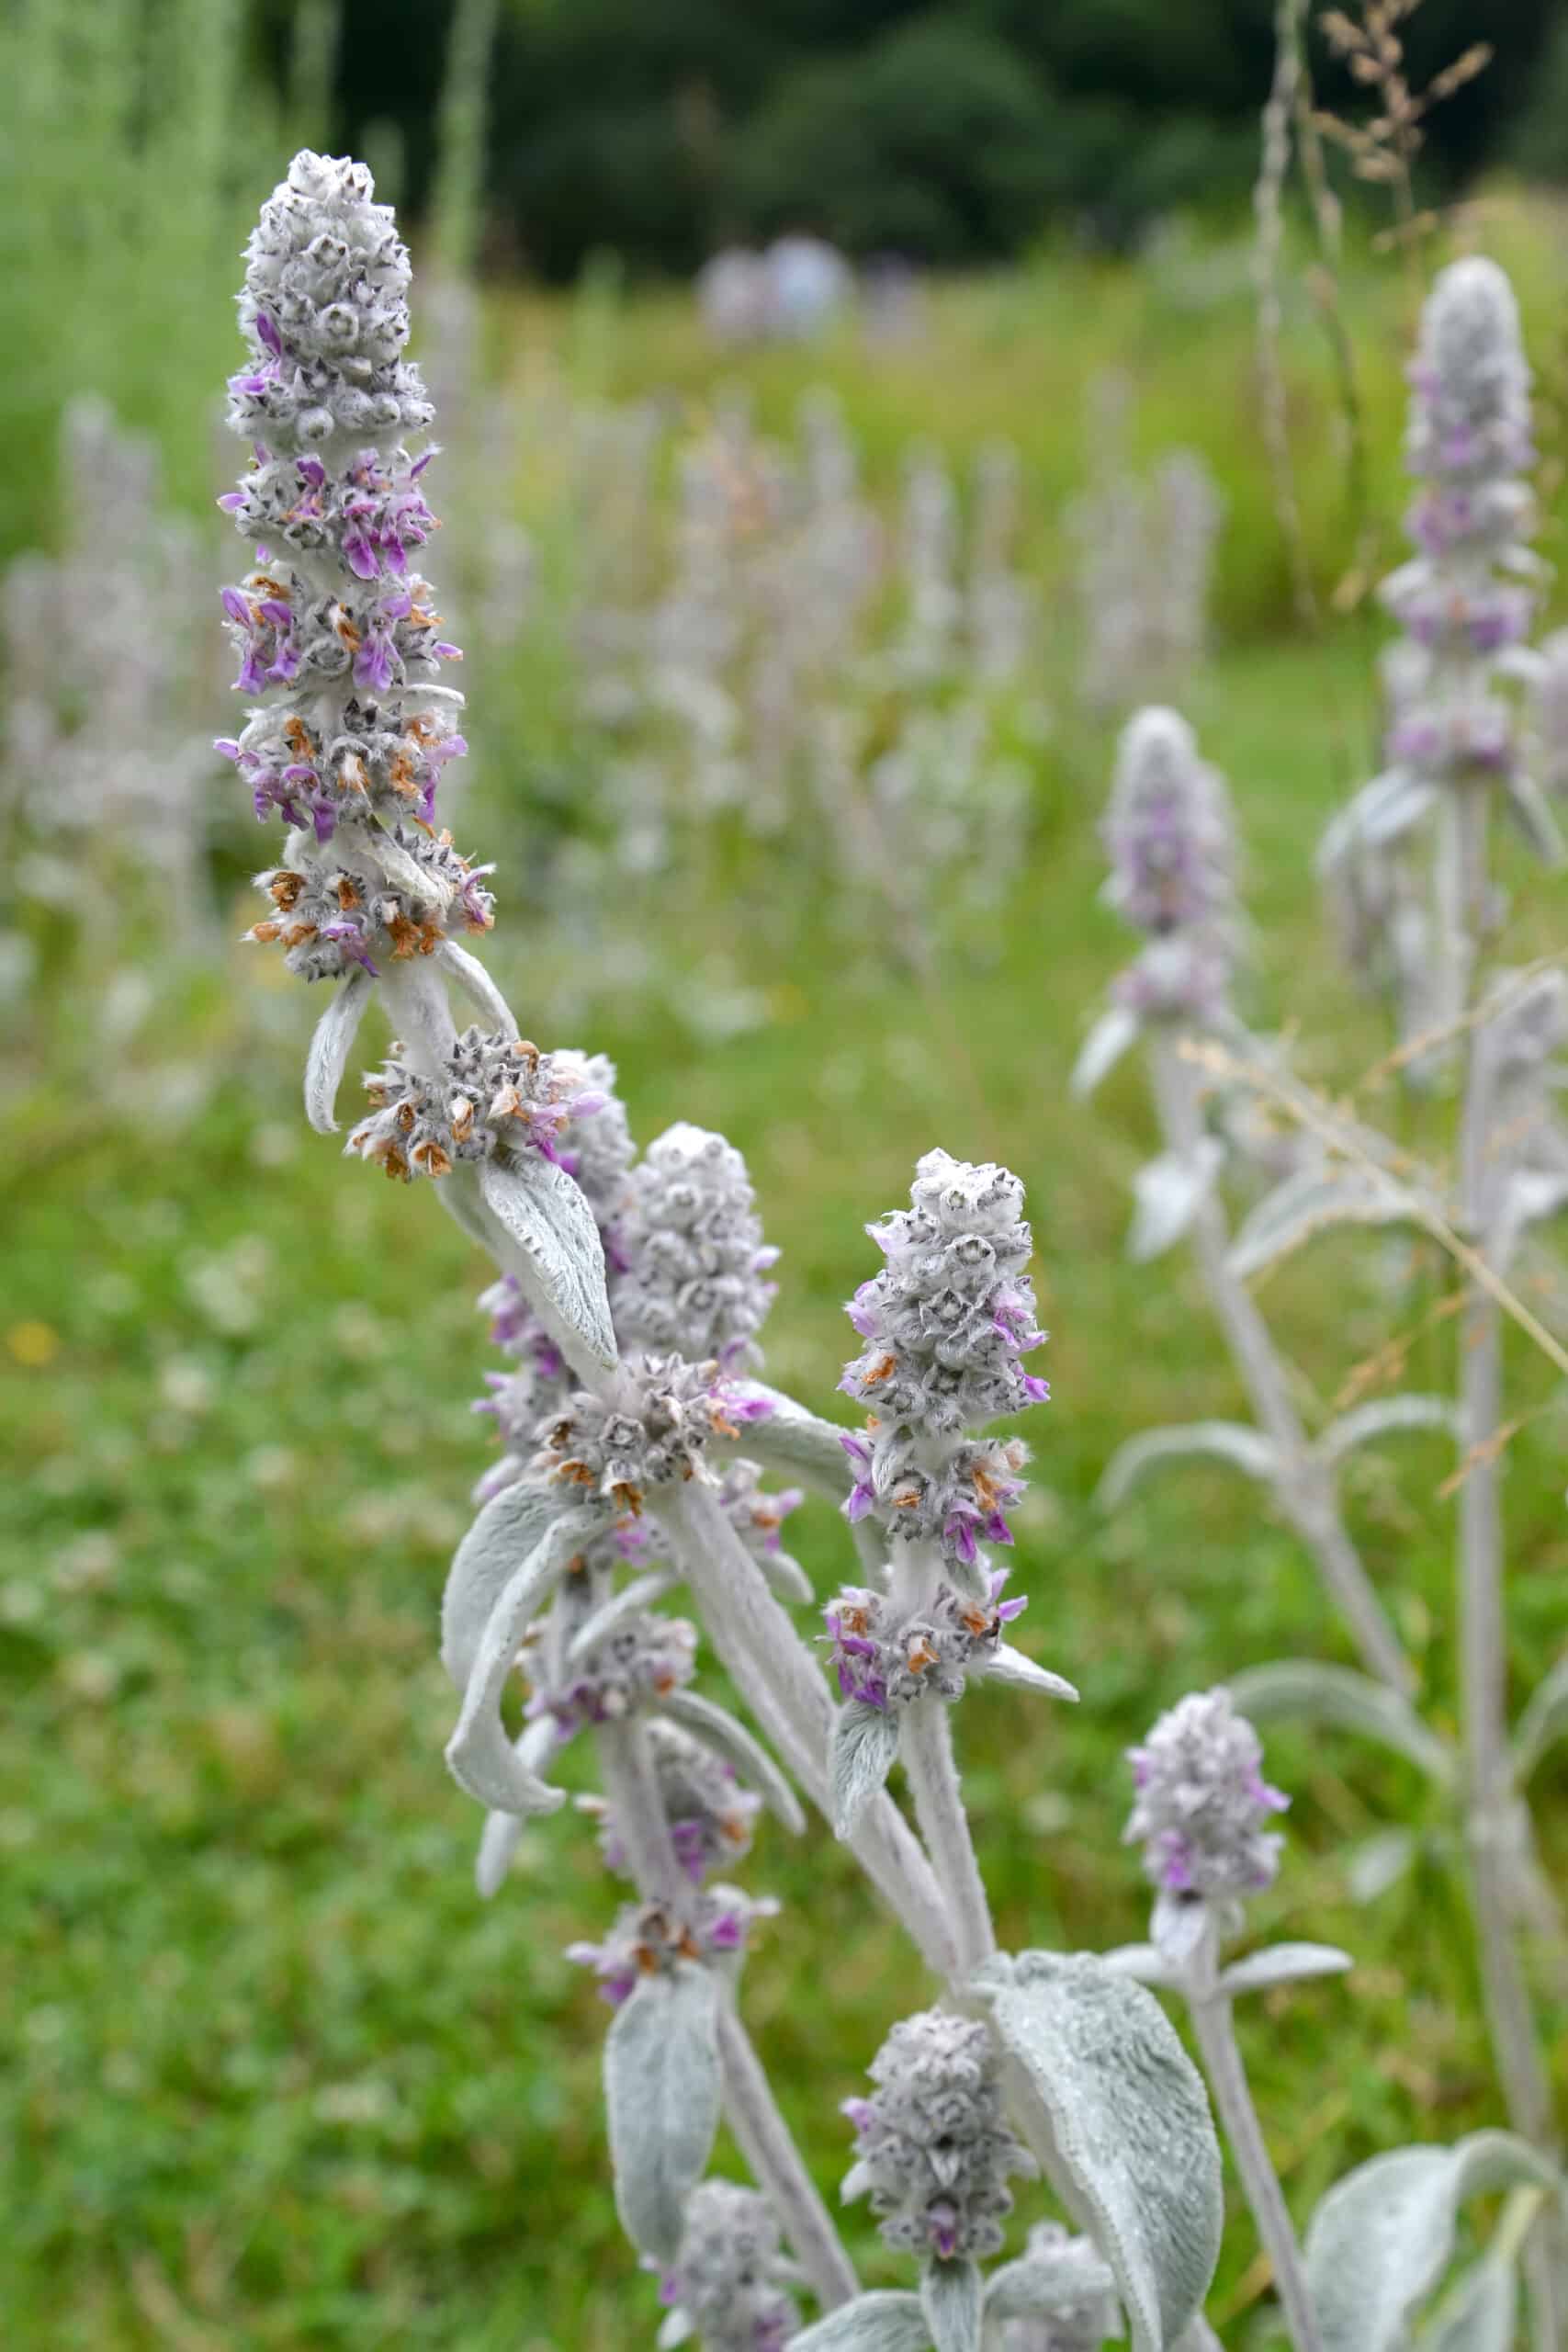 Sage plants in a field with Stachys macrantha and purple flowers.